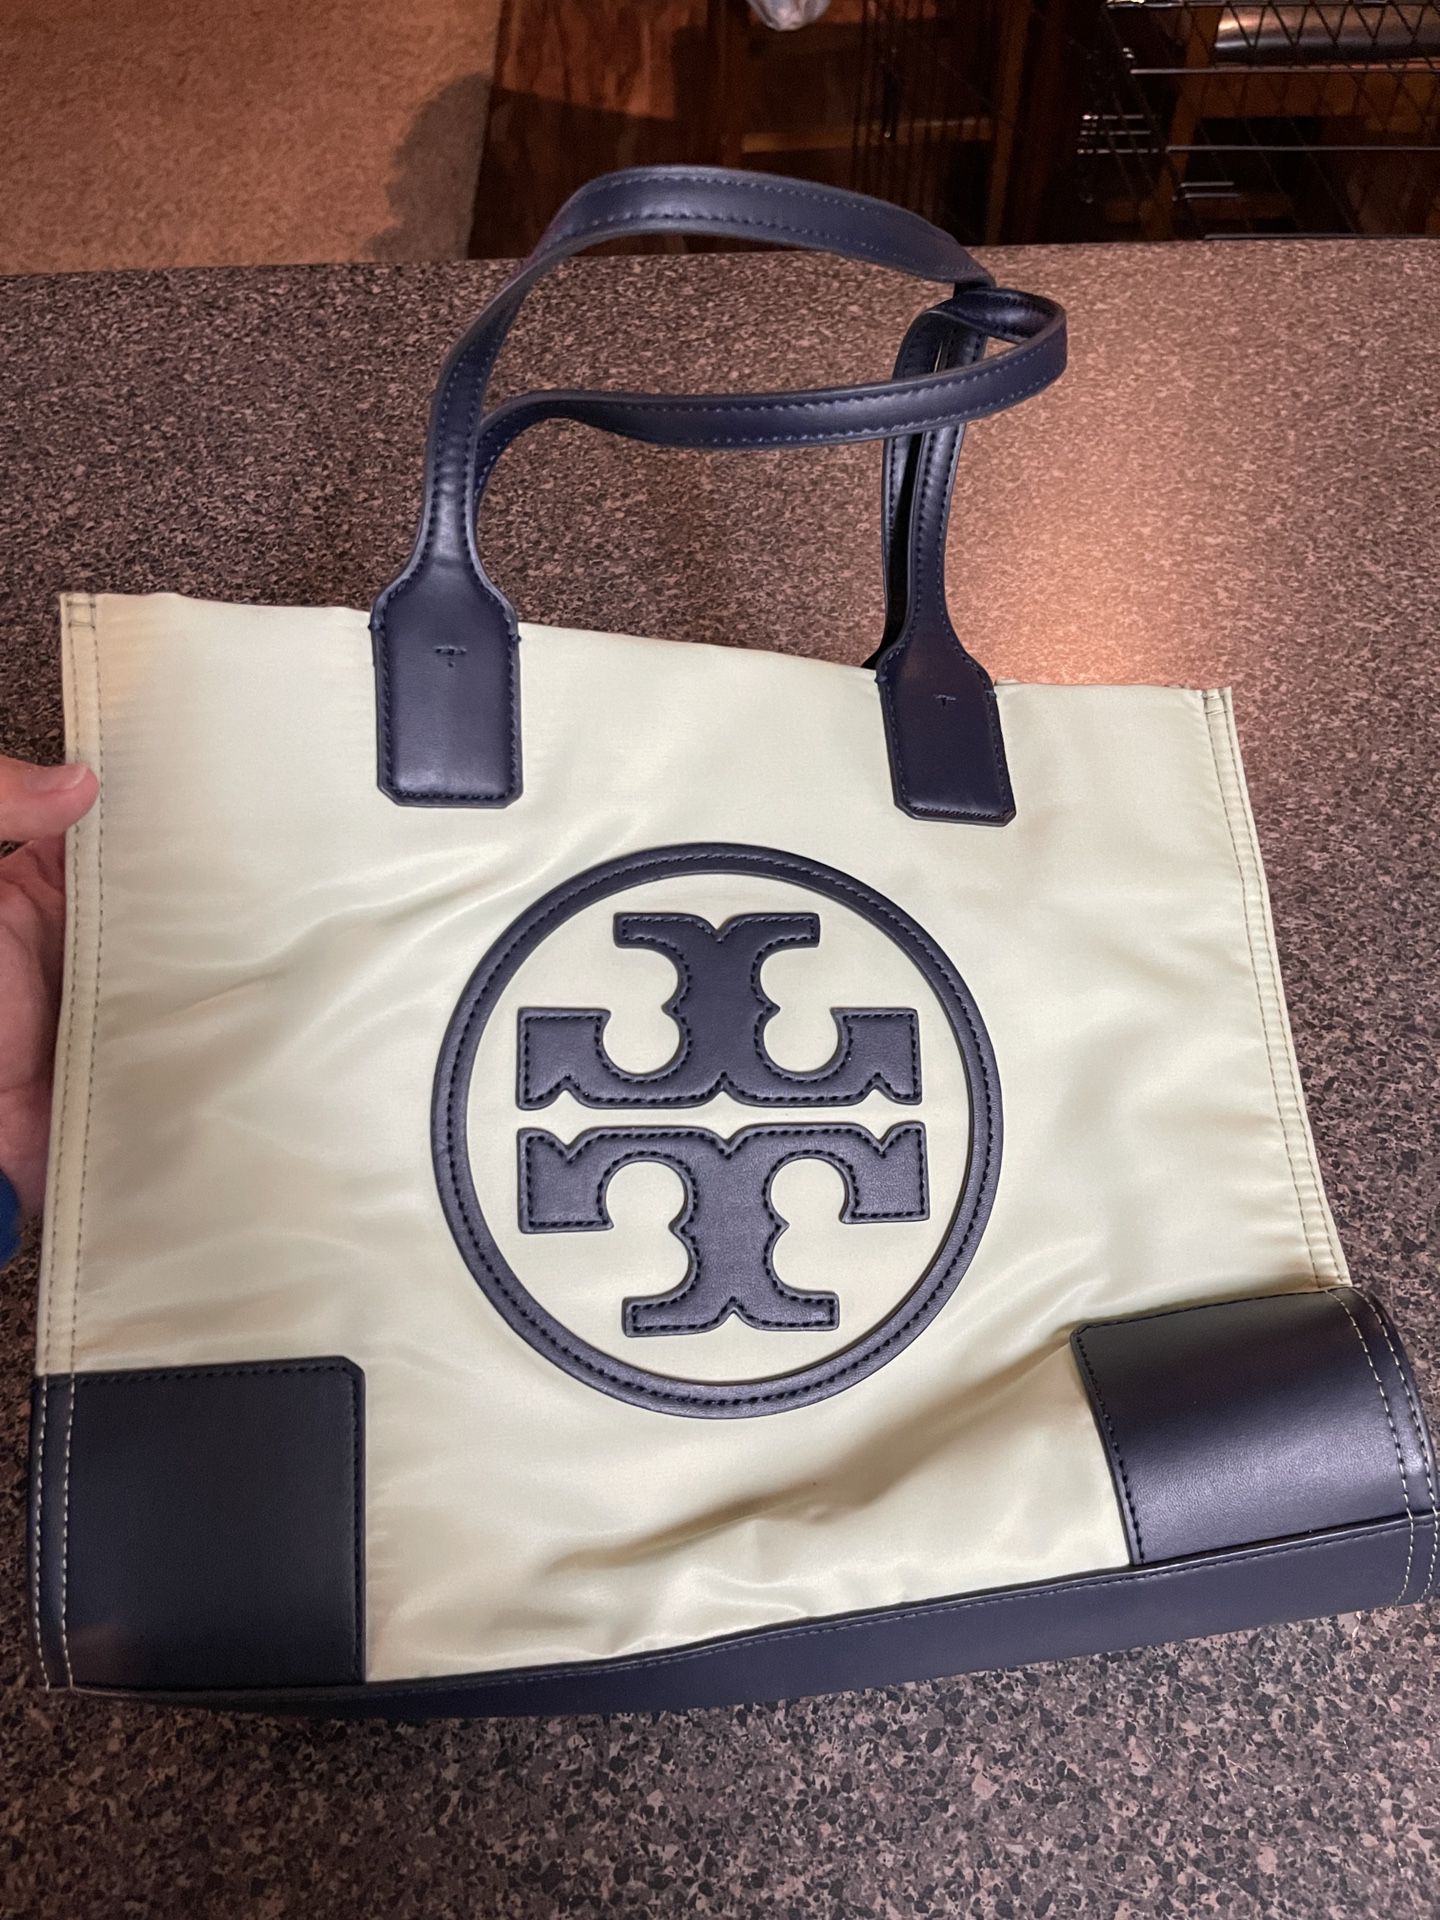 Tory Burch purse for Sale in Laveen Village, AZ - OfferUp